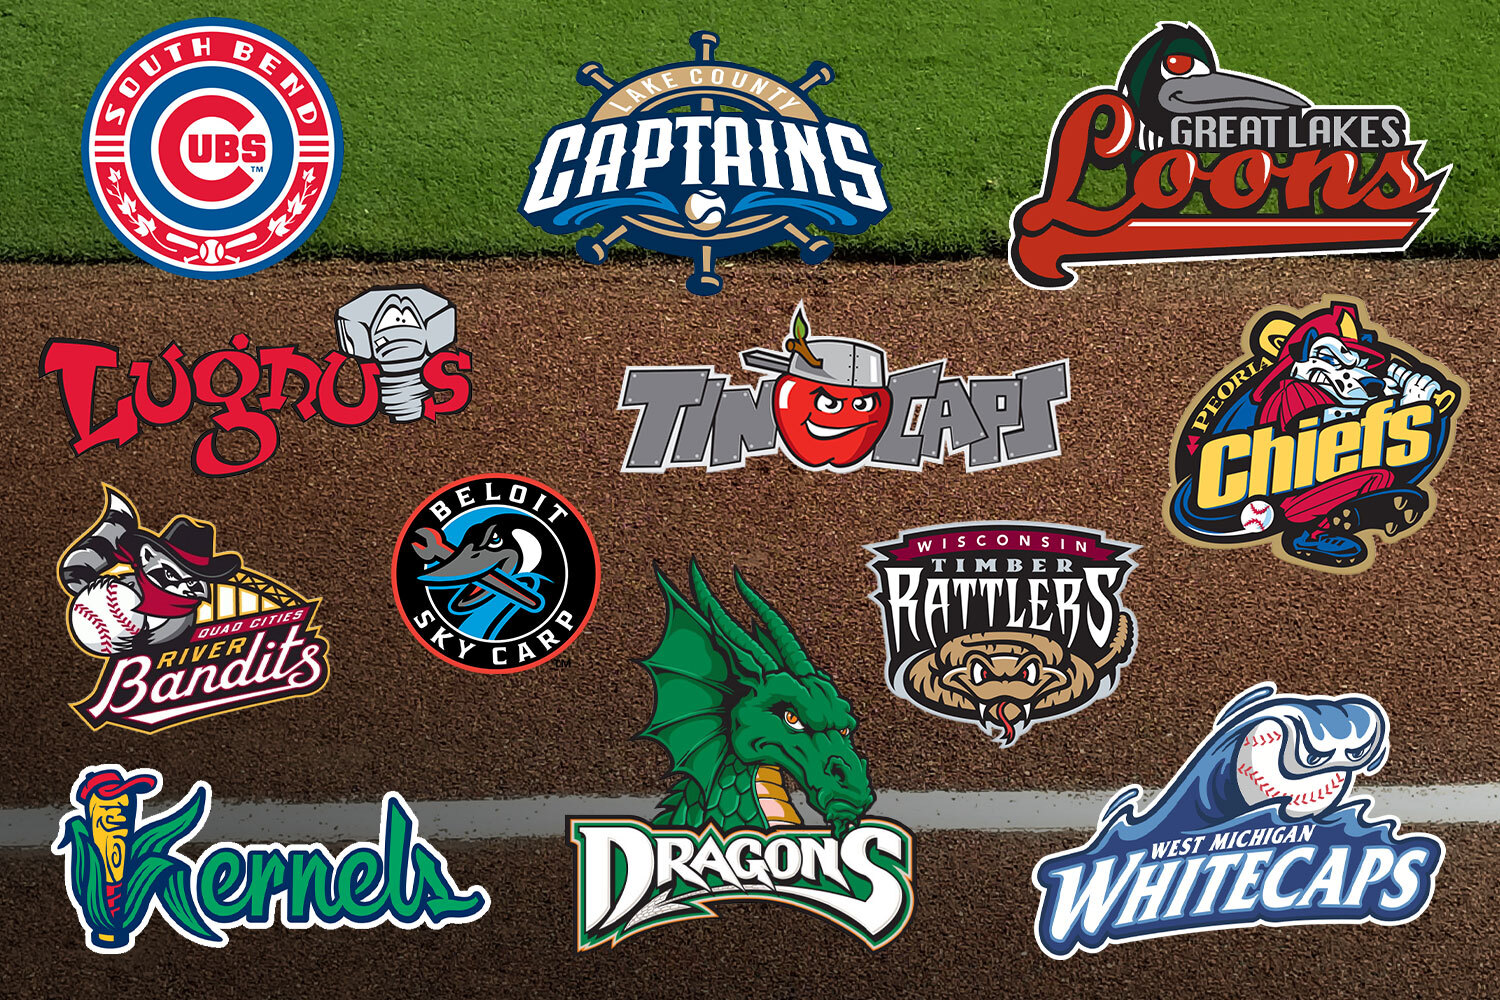 MLB on X: Minor League Baseball returns with Triple-A matchups on April  6th, and all 90 Double-A and Single-A clubs starting on May 4th. Follow  @MiLB to see schedules released throughout the